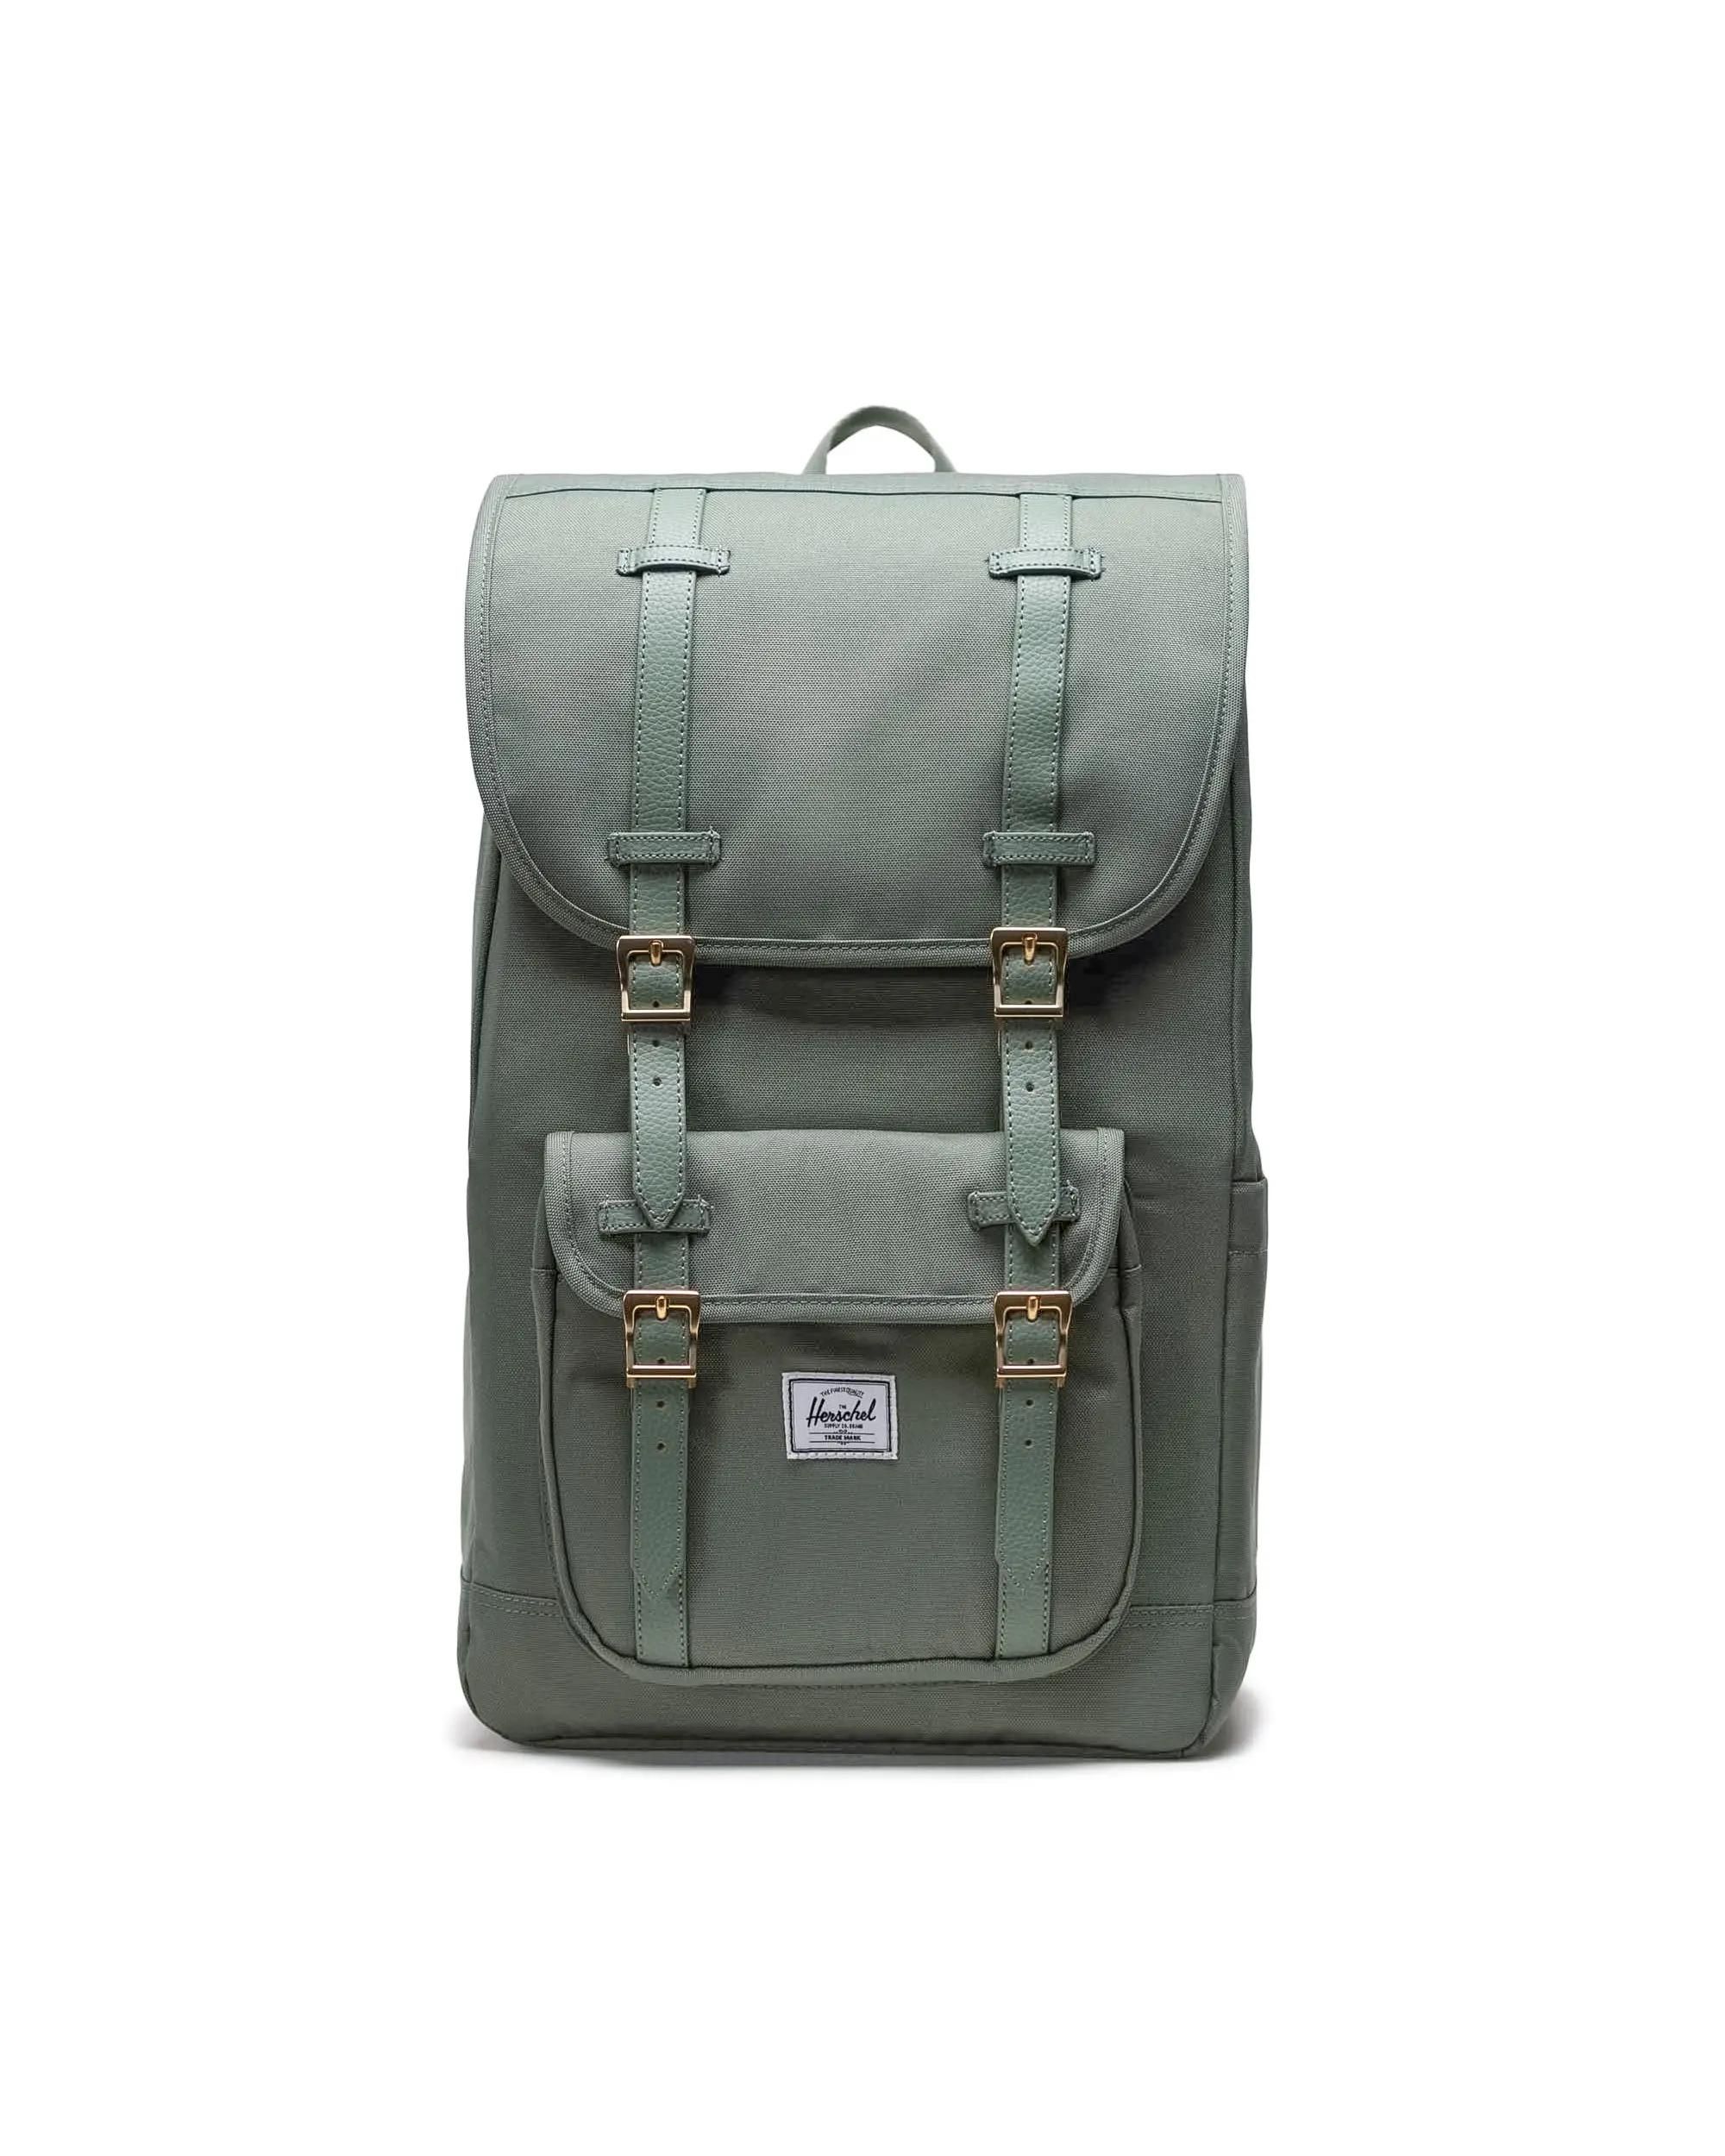 <p><strong>$130.00</strong></p><p><a href="https://go.redirectingat.com?id=74968X1553576&url=https%3A%2F%2Fherschel.com%2Fshop%2Fbackpacks%2Fherschel-little-america-backpack%3FshowSales%3D0%26gclid%3DCjwKCAjwrranBhAEEiwAzbhNtdxYx-cYf9_kdmKg60RMbHeL8Fi6iw0tzaAEEtfCLT4Ur0ECN746bhoCLXwQAvD_BwE%26v%3D11390-05928-OS&sref=https%3A%2F%2Fwww.cosmopolitan.com%2Flifestyle%2Fg44939131%2Fbest-travel-backpacks-for-women%2F">Shop Now</a></p><p>This travel backpack from Herschel has a drawstring closure for its main compartment that offers a lot more space than you may think. It's roomy because of its flexible structure that'll adjust itself depending on what items you fill it up with. And, ofc, the pull string allows you to customize the size of the pocket.</p>